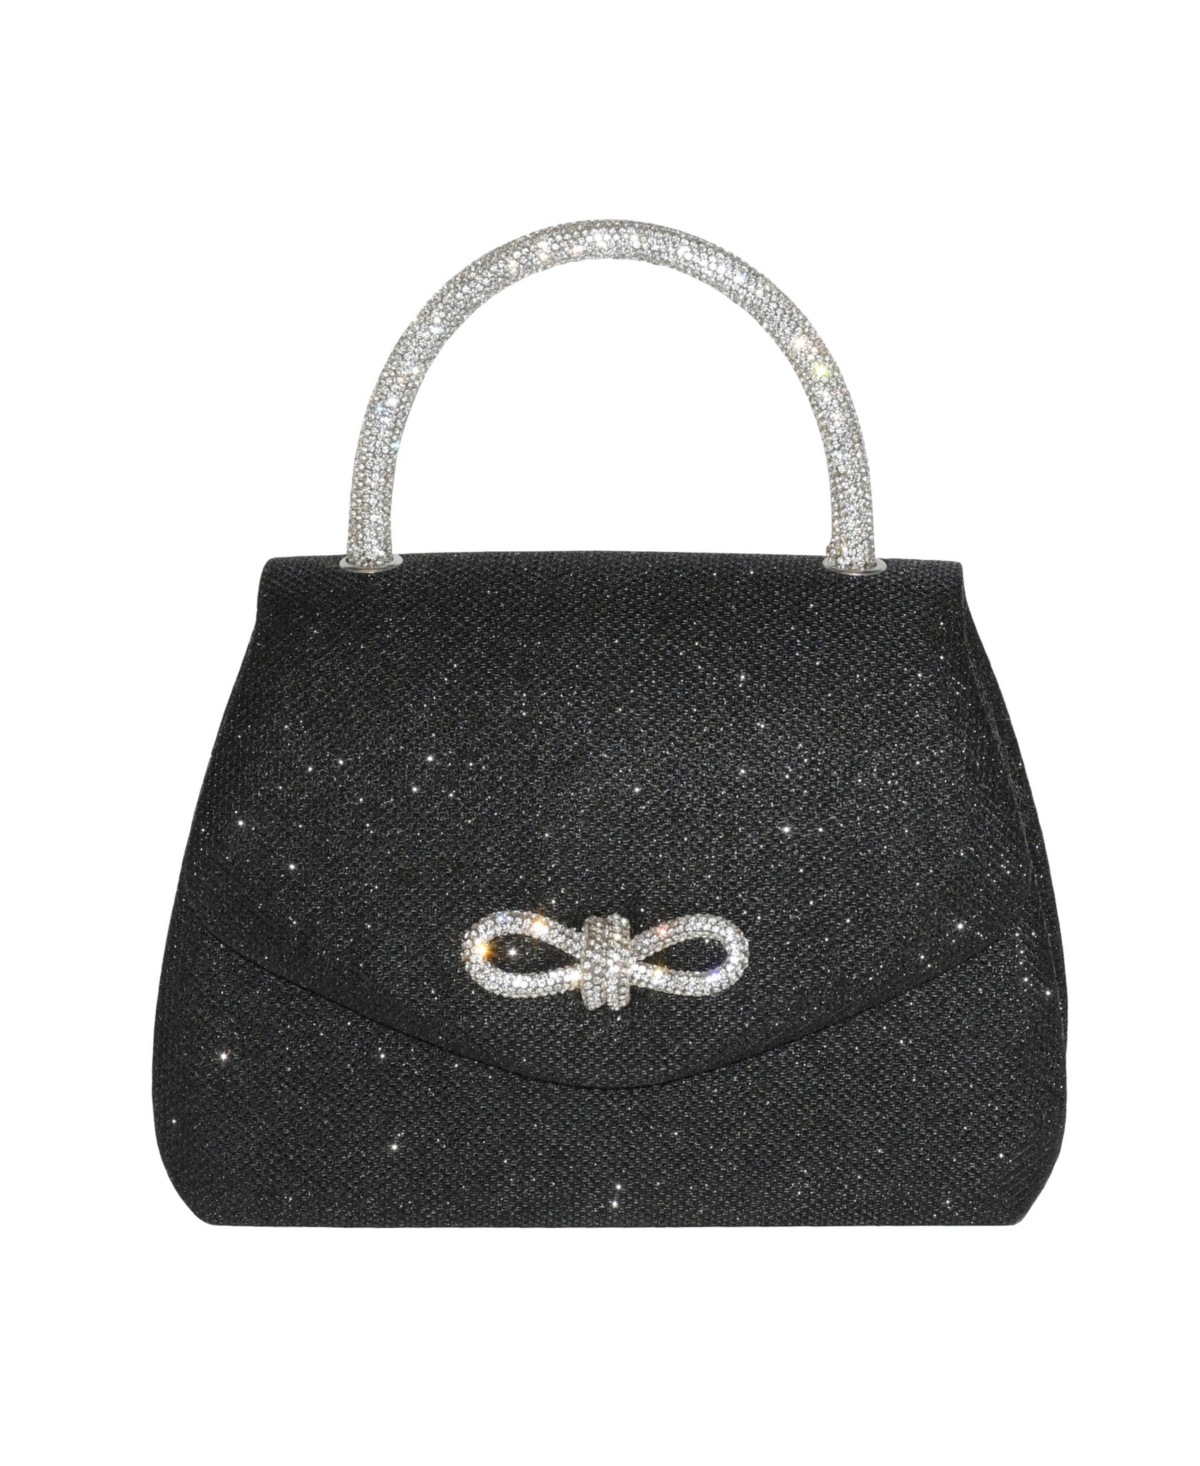 Ladies' Evening Bag with Glitter Handle and Bow - Black